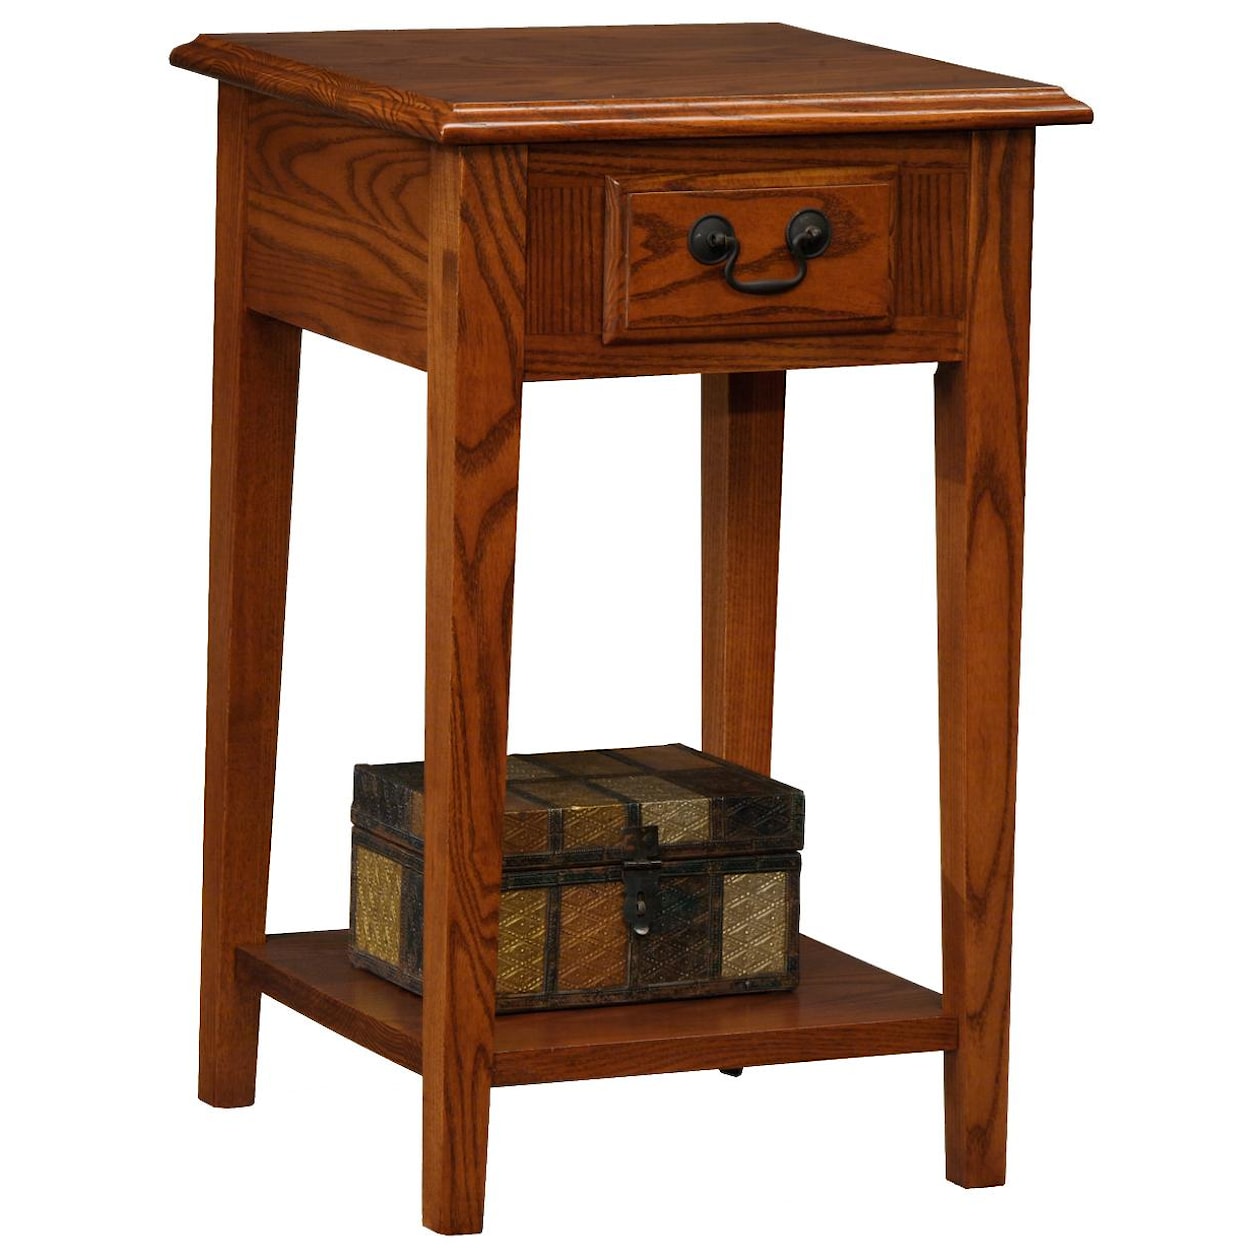 Leick Furniture Favorite Finds Square Side Table